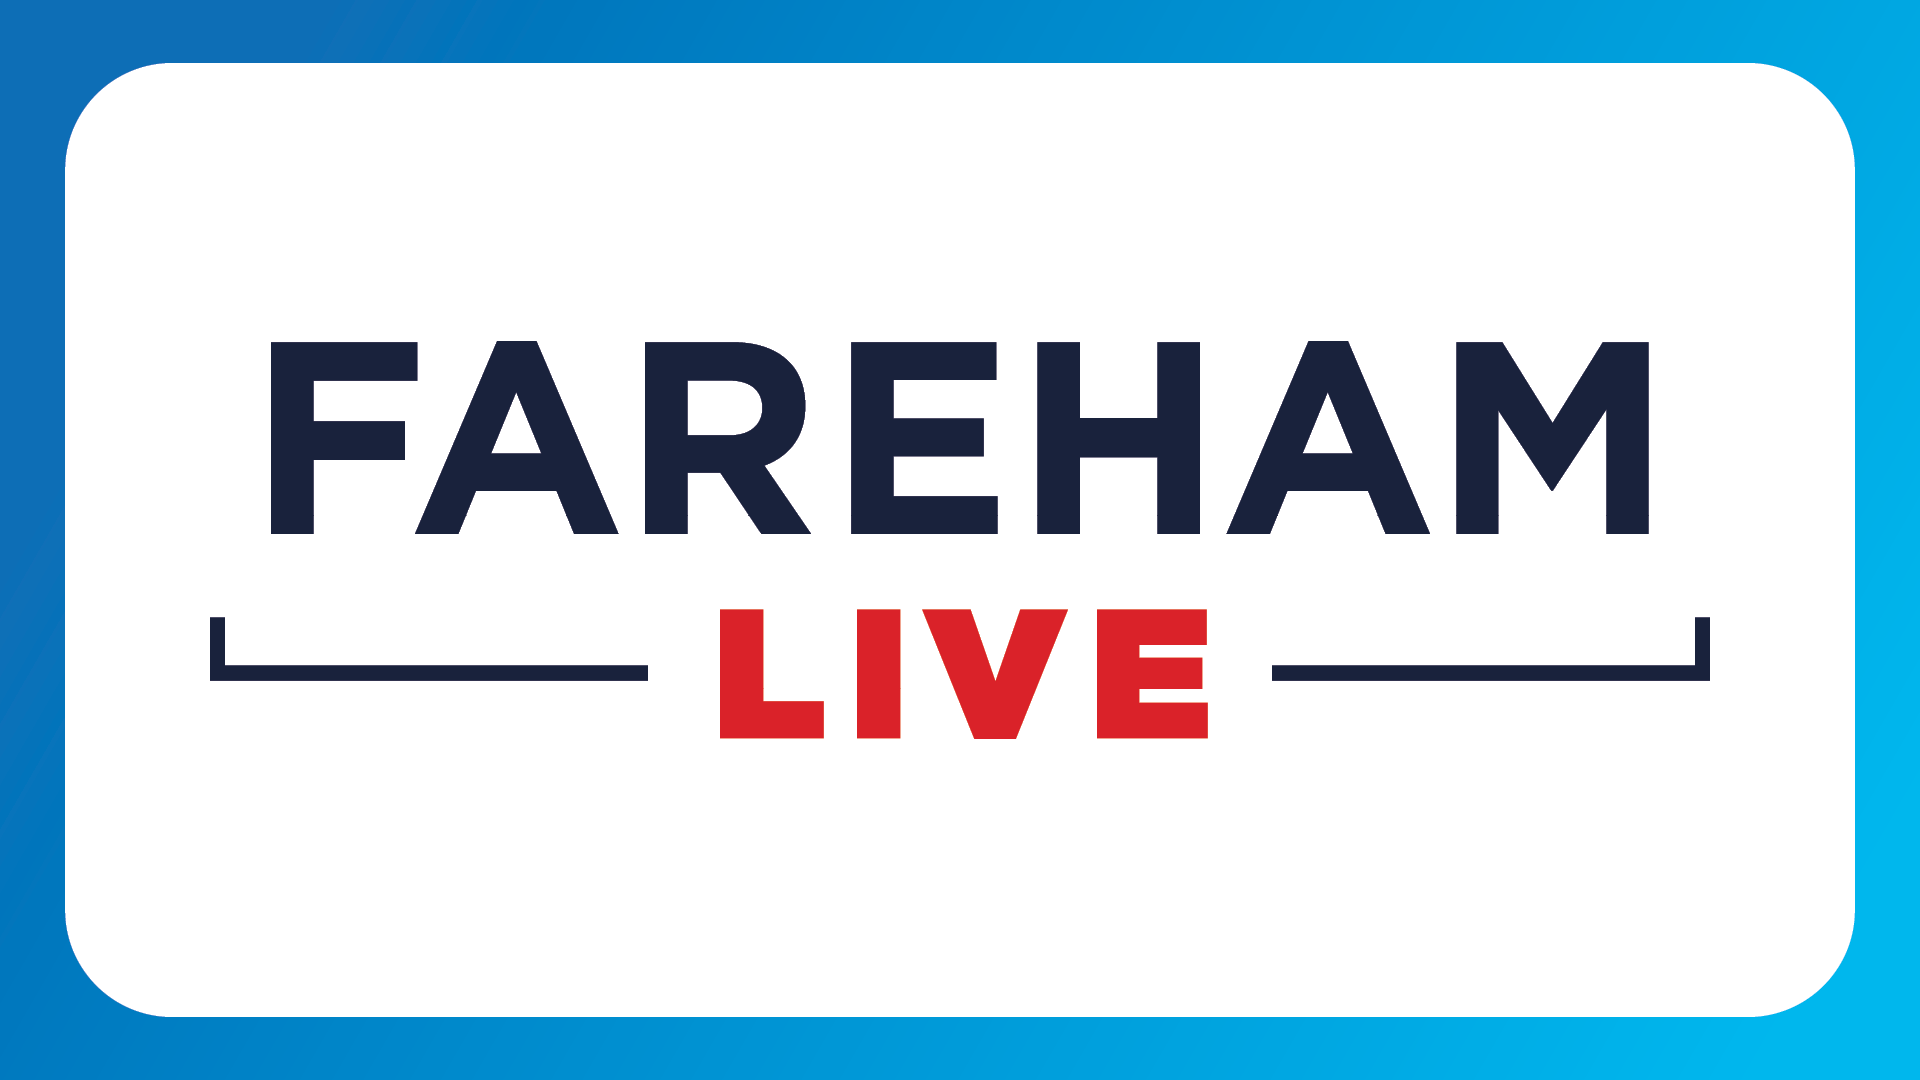 Fareham Live tickets now available